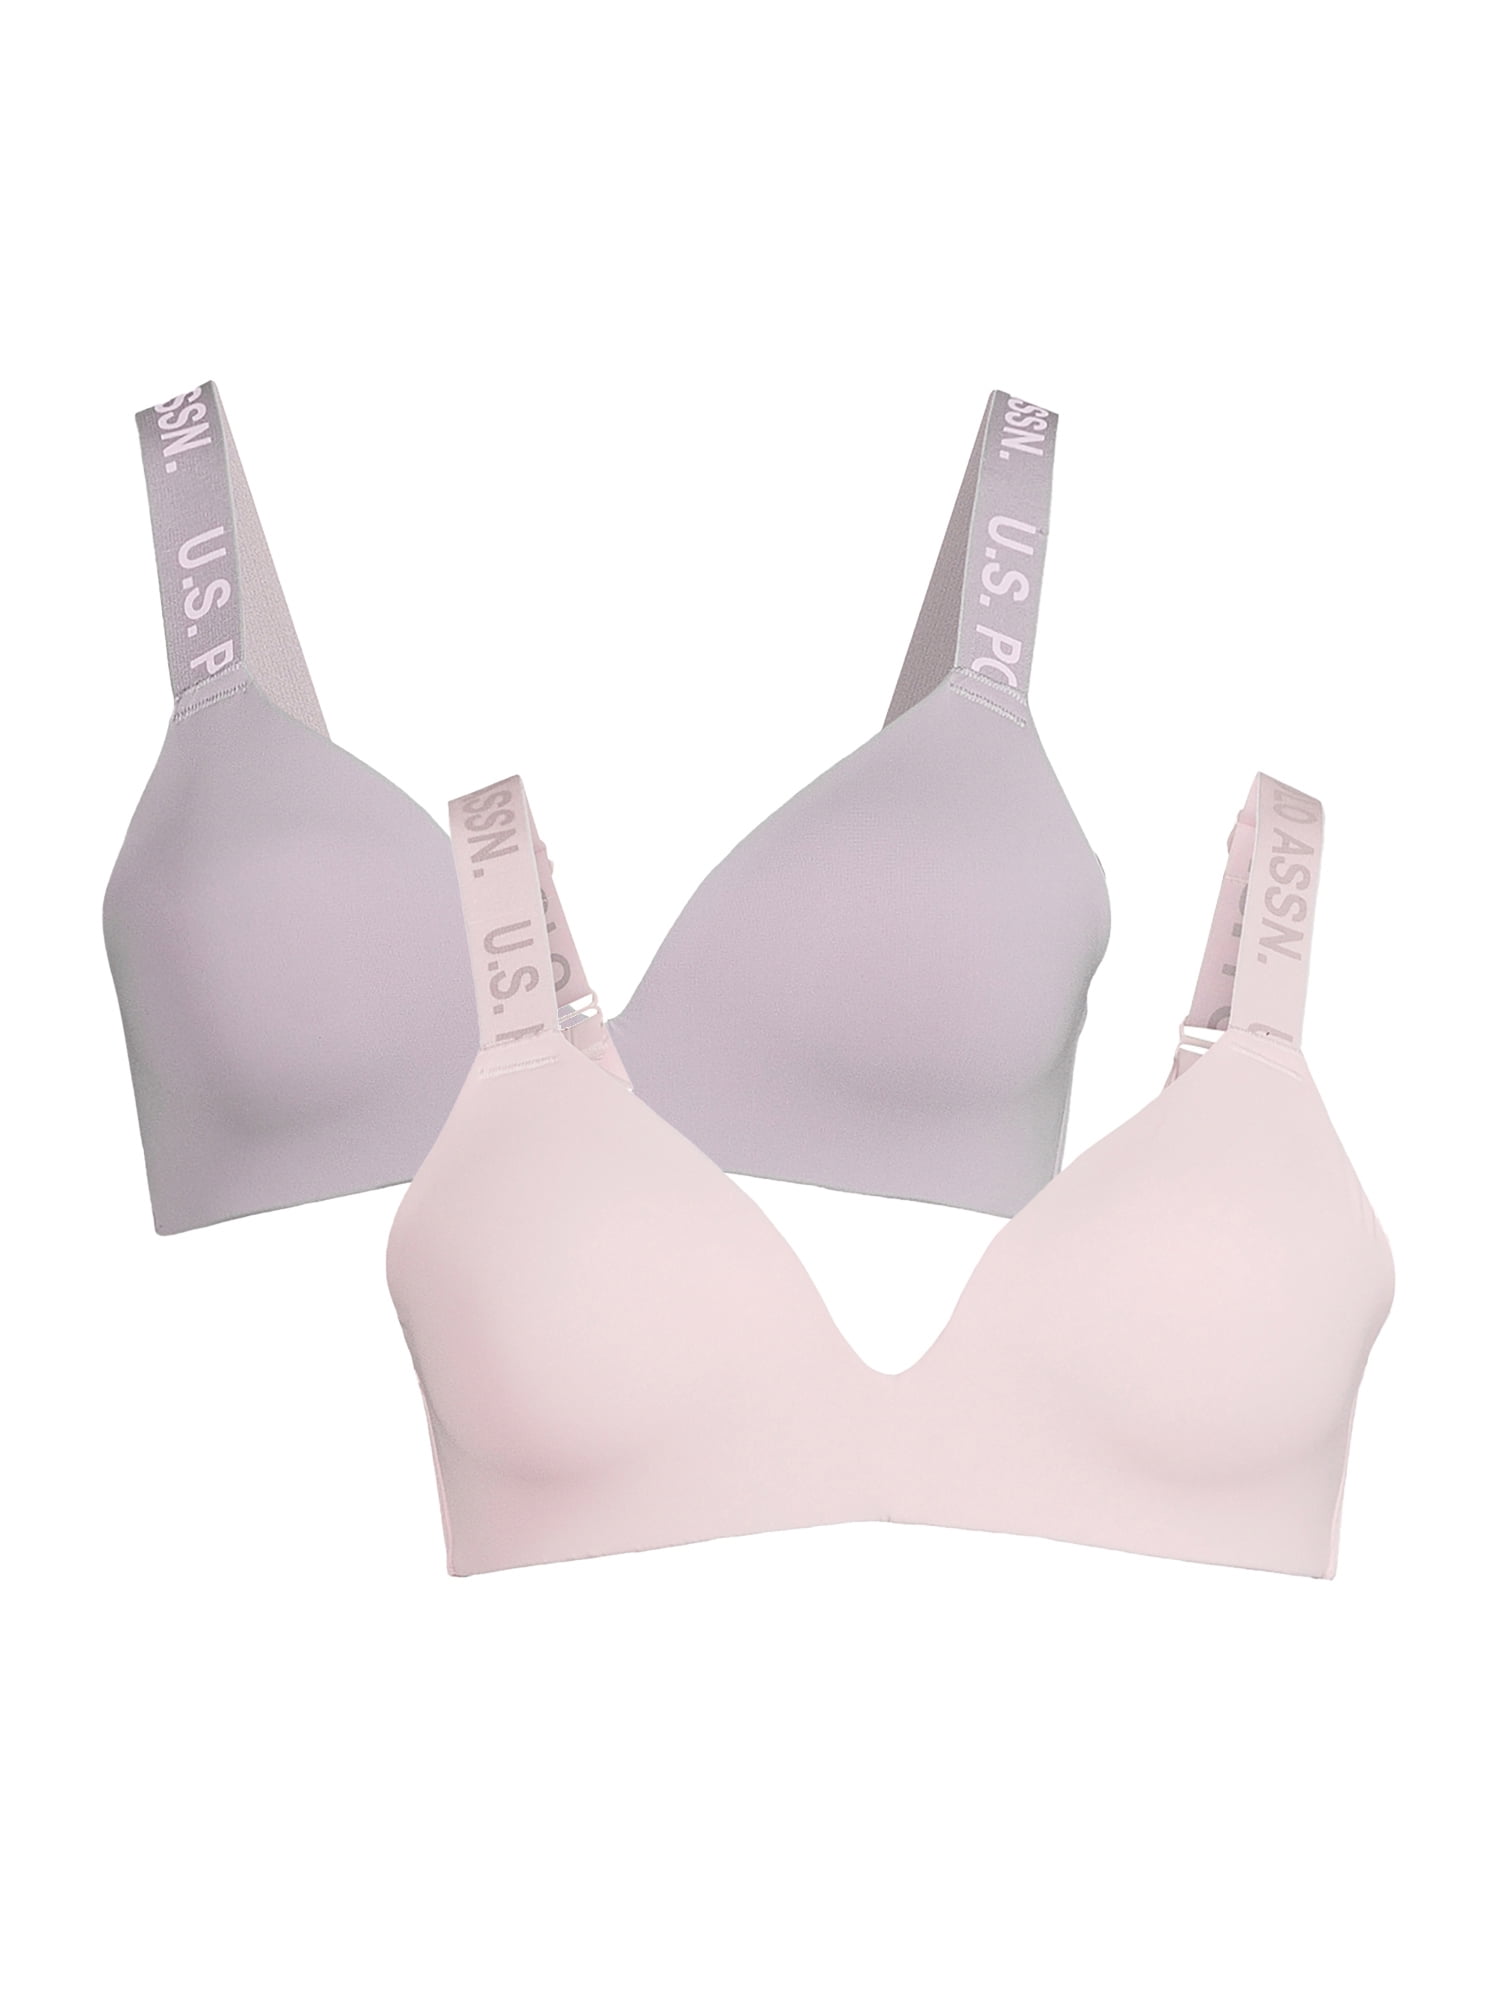 U.S. Polo Assn. Women's Wirefree Push Up Bra, 2-Pack 